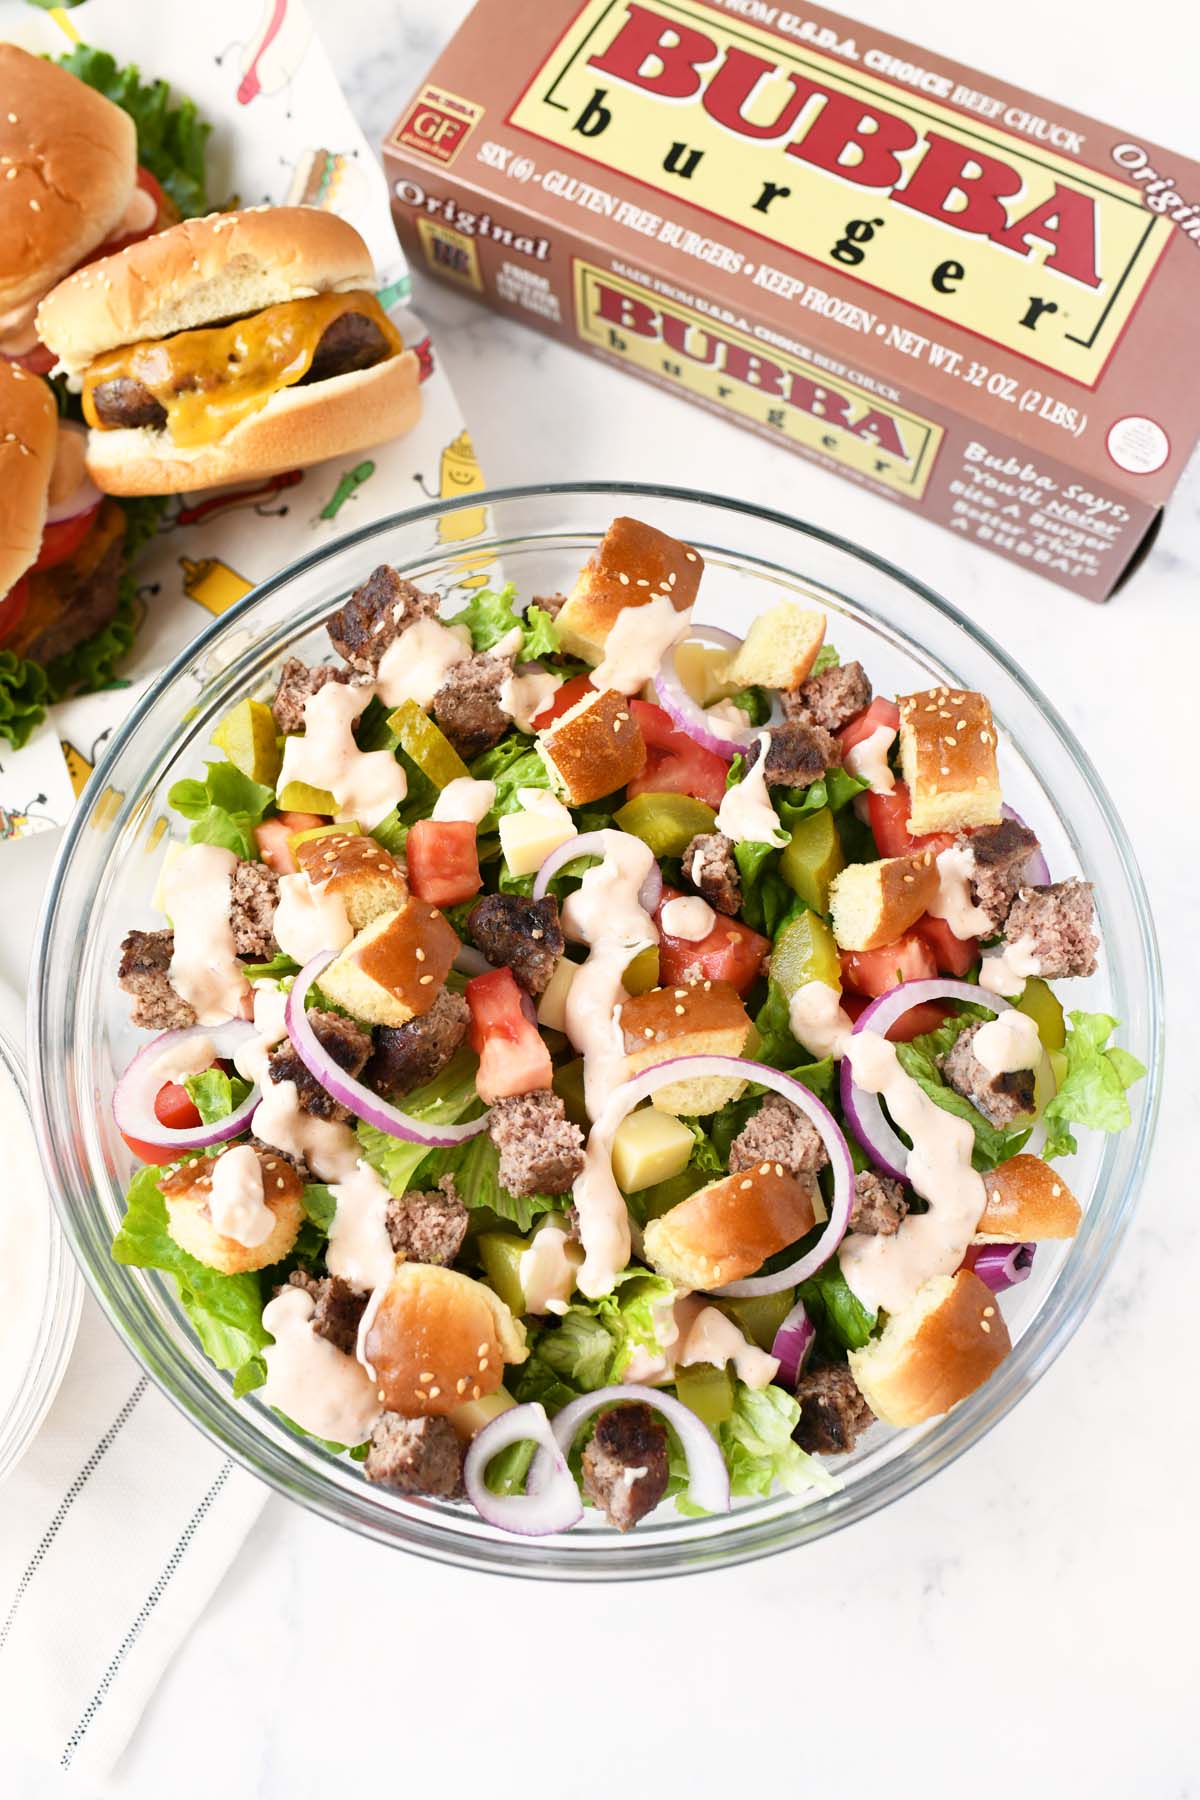 A large glass bowl of cheeseburger salad with a box of bubba burgers.